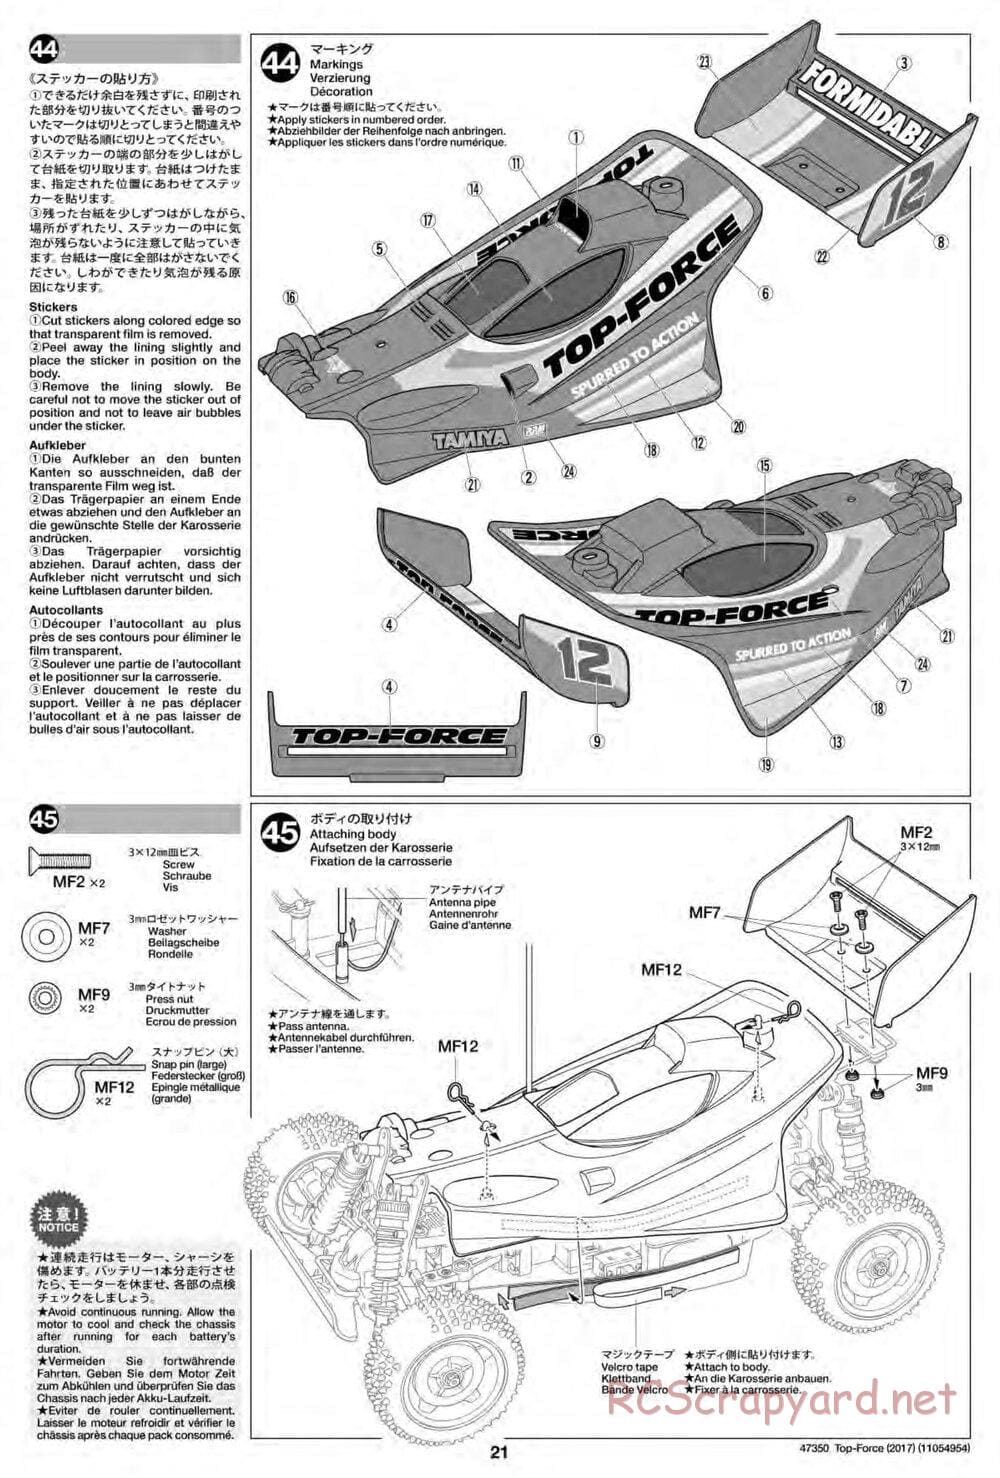 Tamiya - Top Force 2017 - DF-01 Chassis - Manual - Page 21